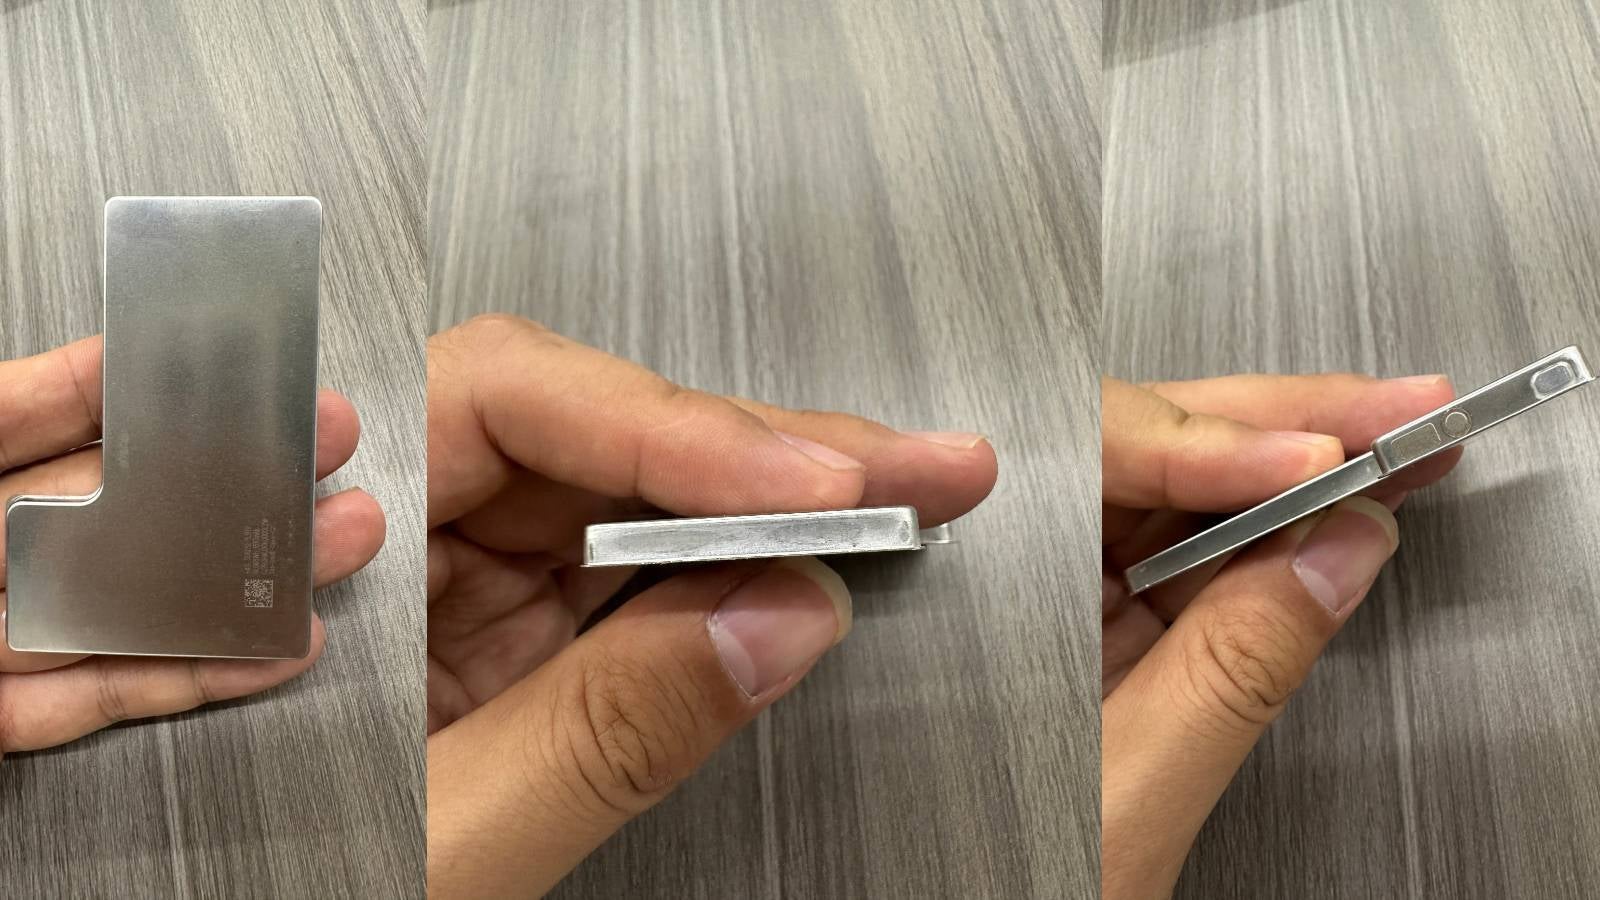 Leaked images indicate the iPhone 16 Pro's battery will have a metal covering - Alleged image of iPhone 16 battery shows Apple won't take the risk it did with iPhone 15 Pro